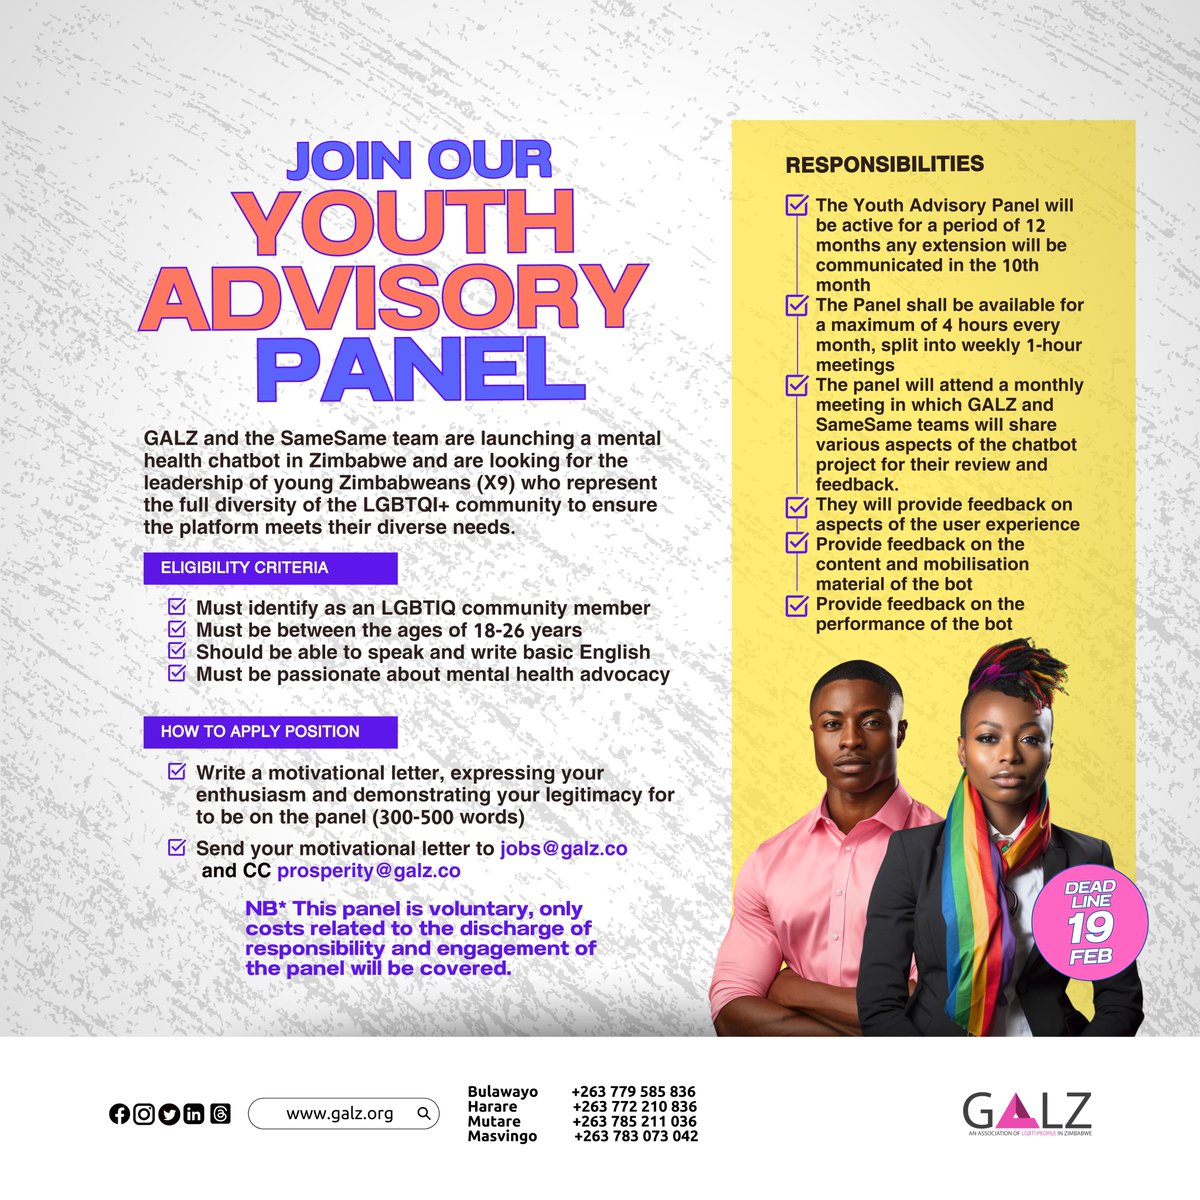 An opportunity to make a difference! We're assembling a Youth Advisory Panel to help represent the full diversity of the LGBTIQ community in mental health and wellbeing. We would like you to be on it. #leadthechange #LGBTQYouthPower #YouthAdvisoryPanel #CommunityFirst